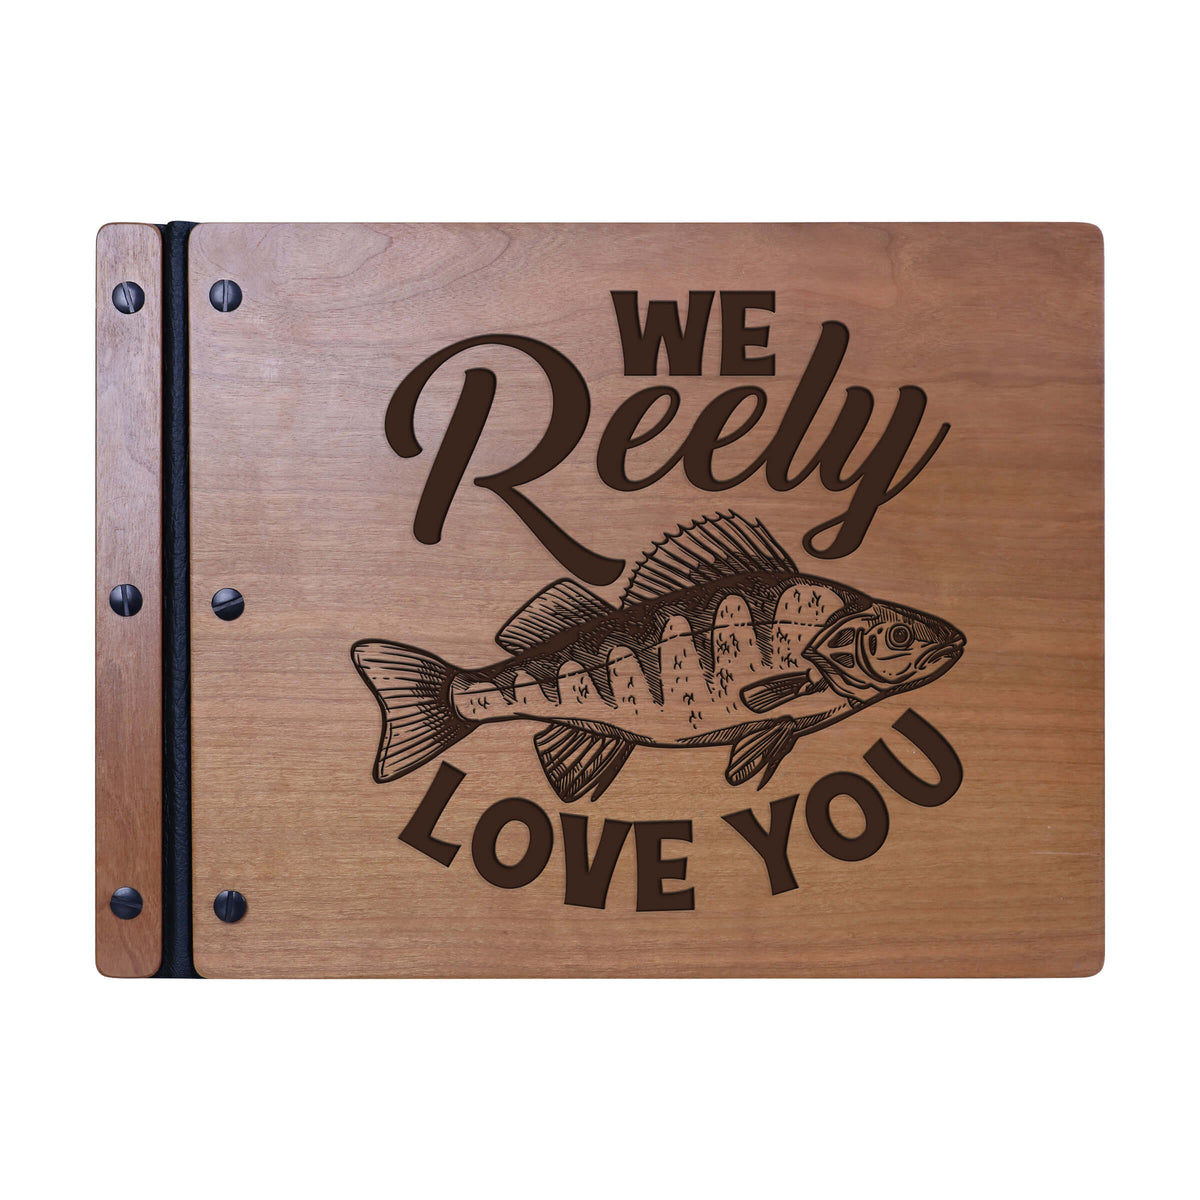 Wooden Memorial Large Guestbook with Fisherman Verse for Funeral Service - We Reely Love You